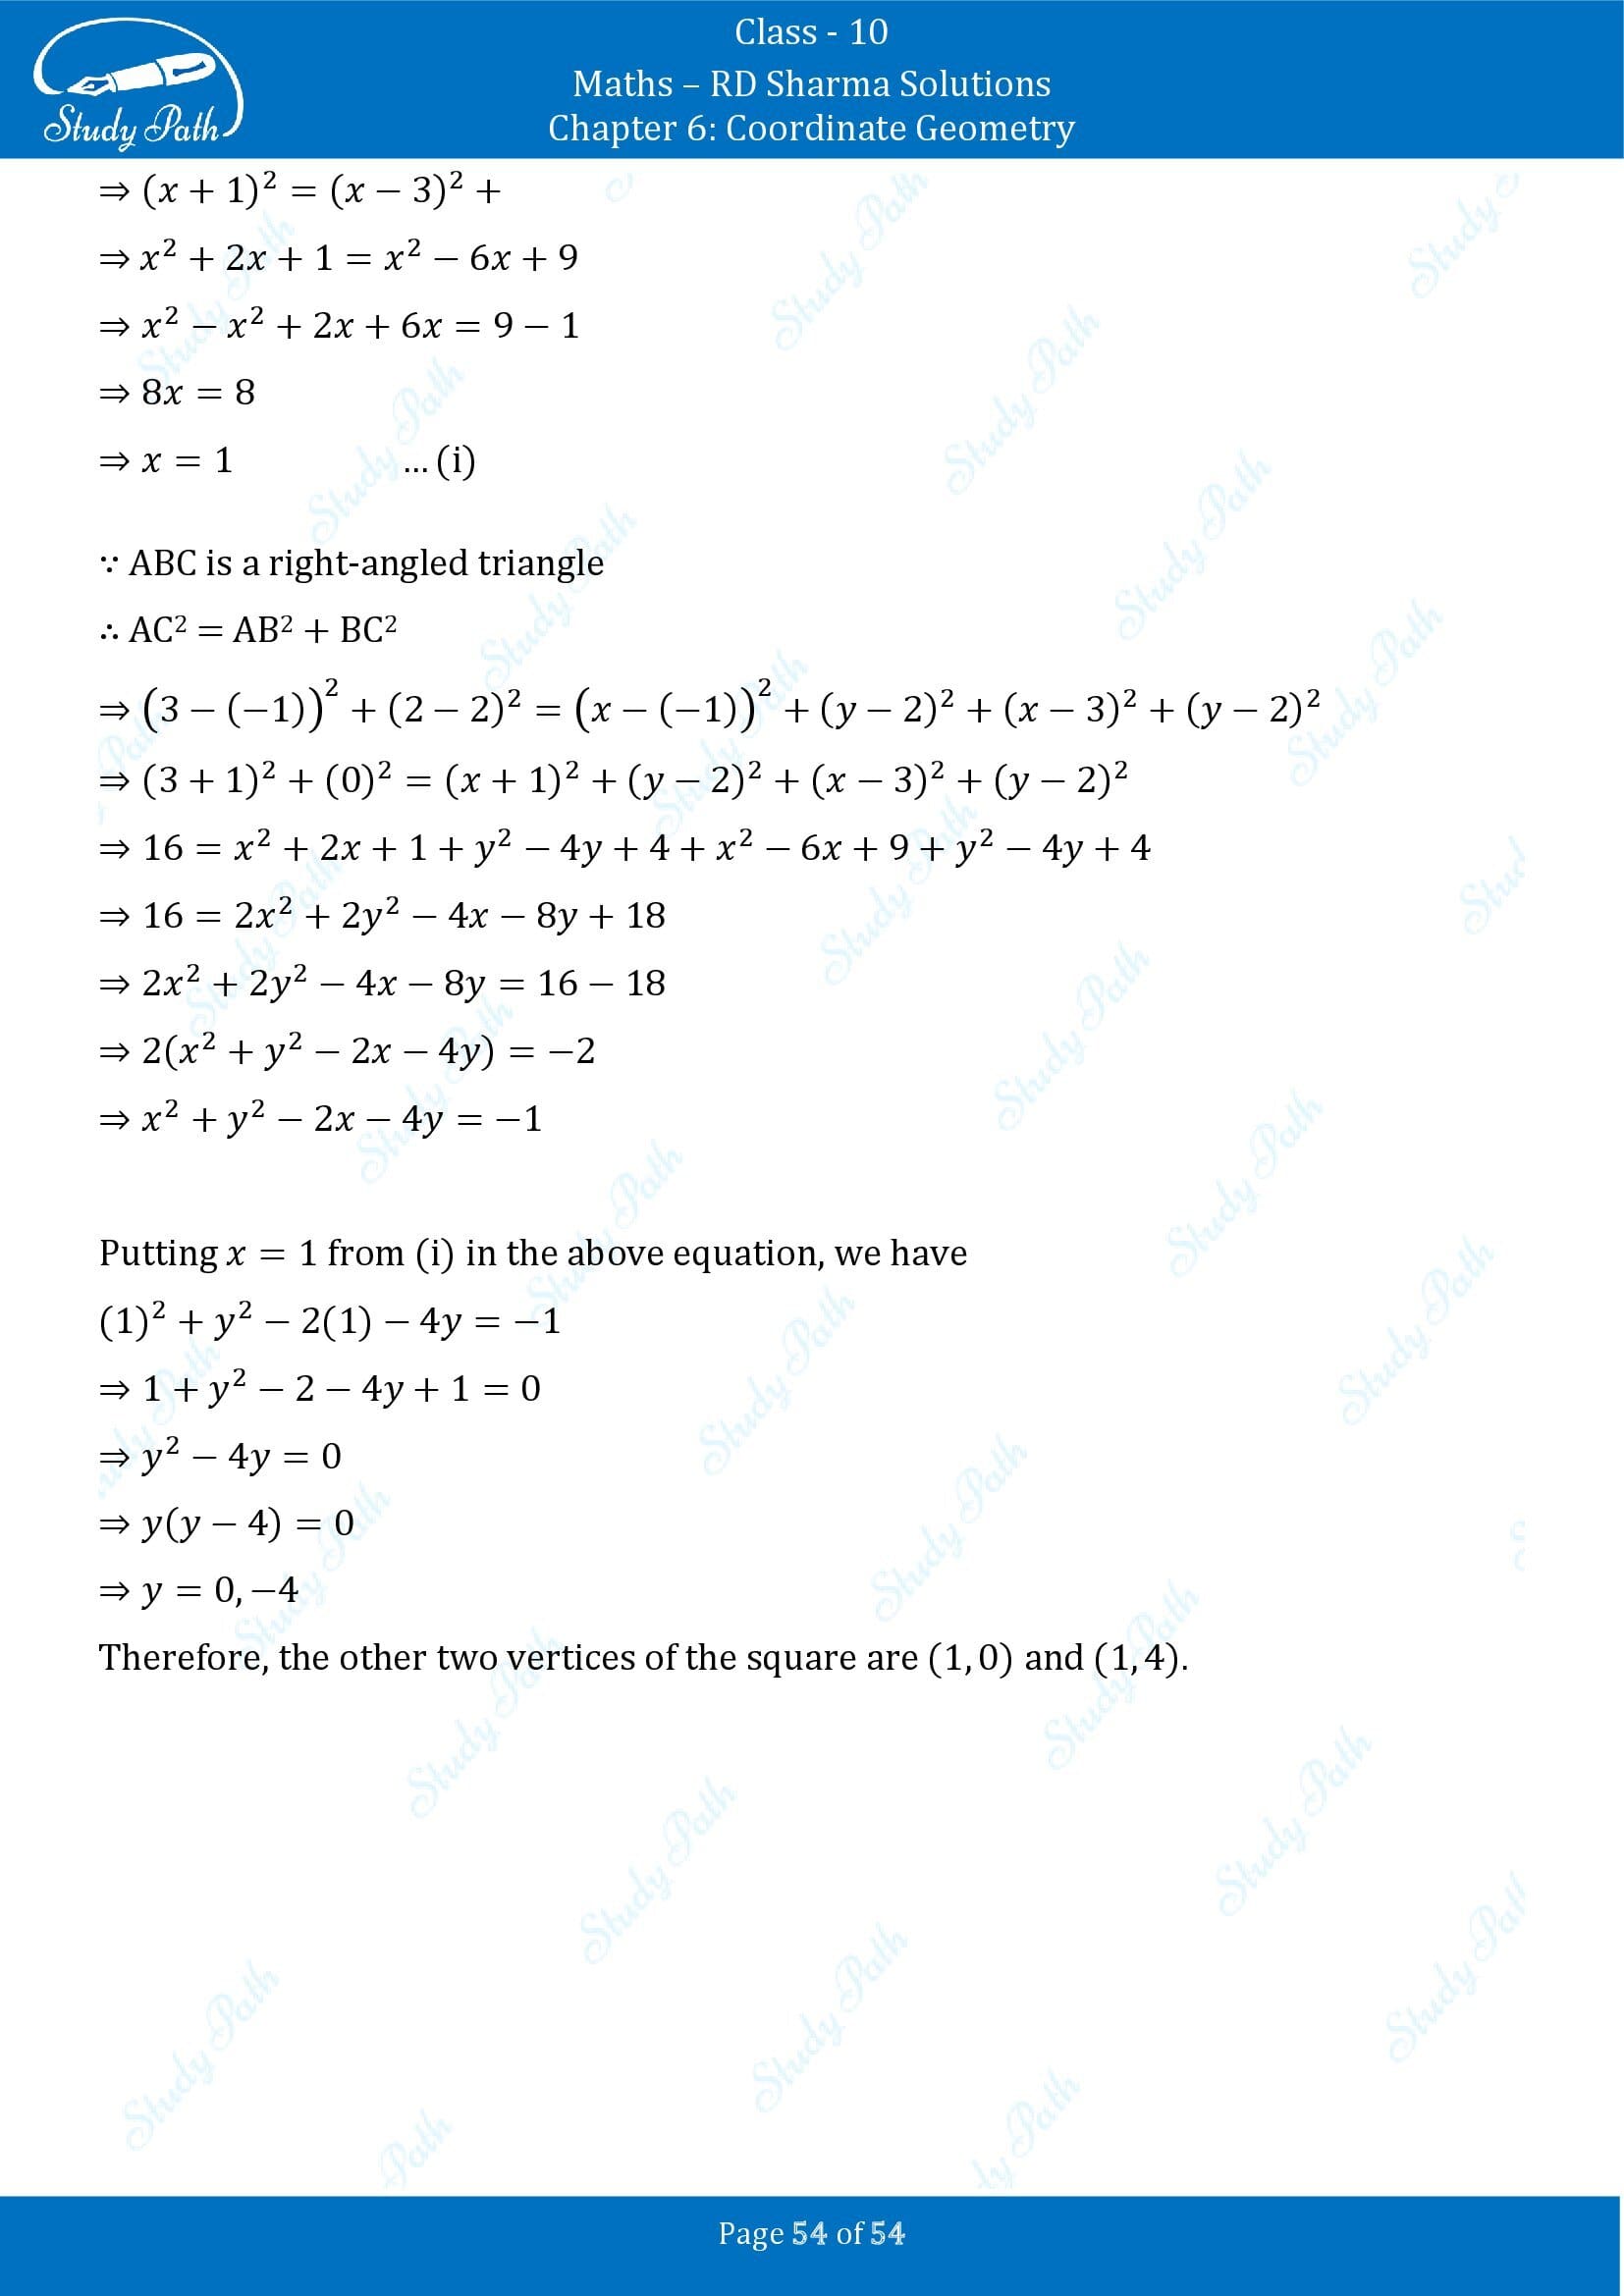 RD Sharma Solutions Class 10 Chapter 6 Coordinate Geometry Exercise 6.2 0054